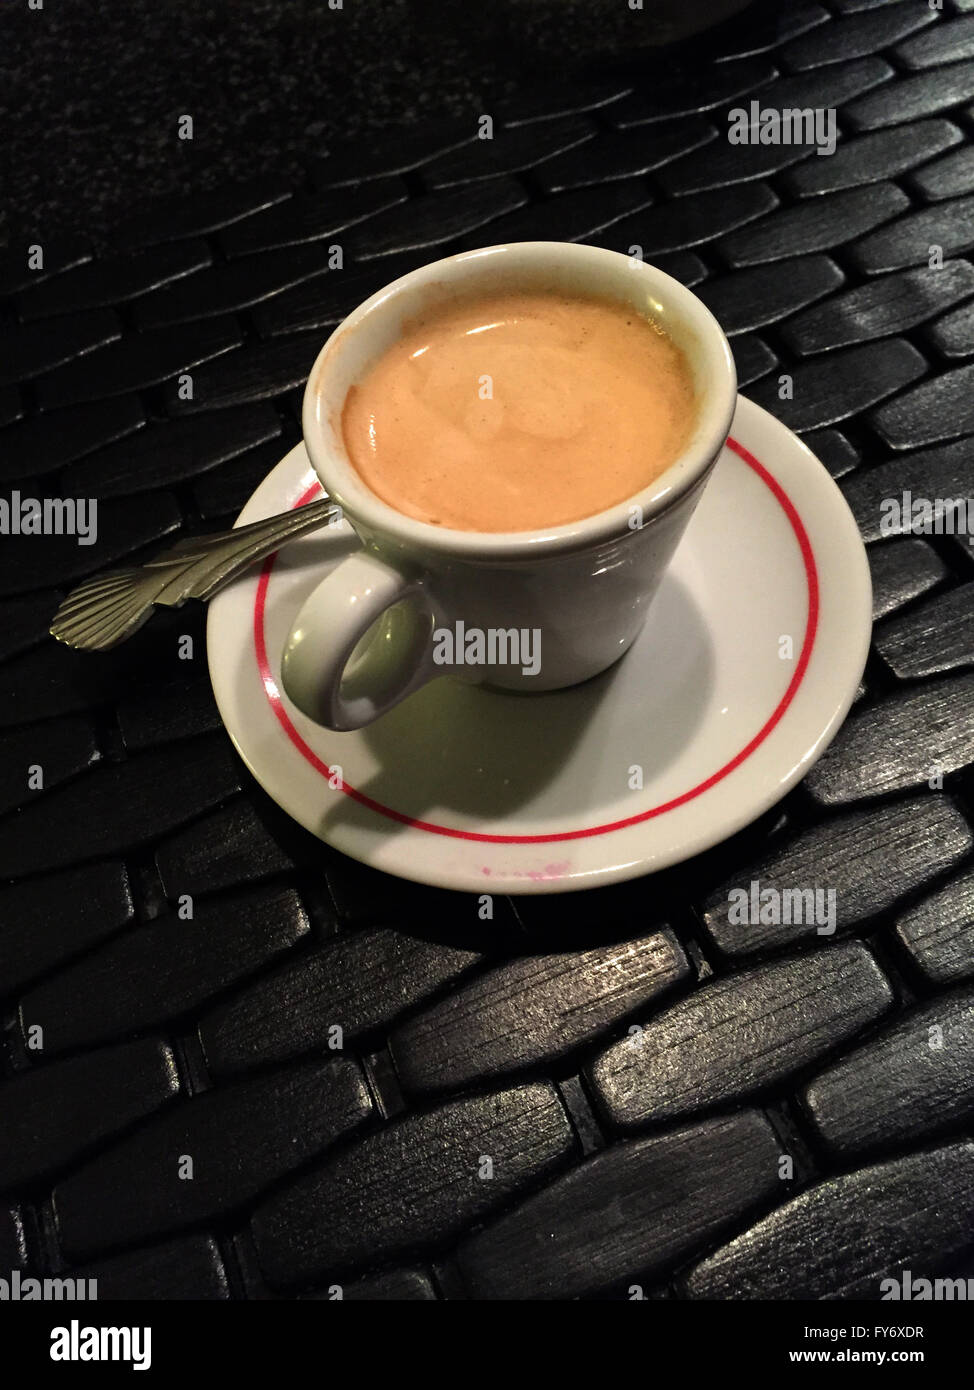 Espresso Coffee served in demitasse cup. Stock Photo